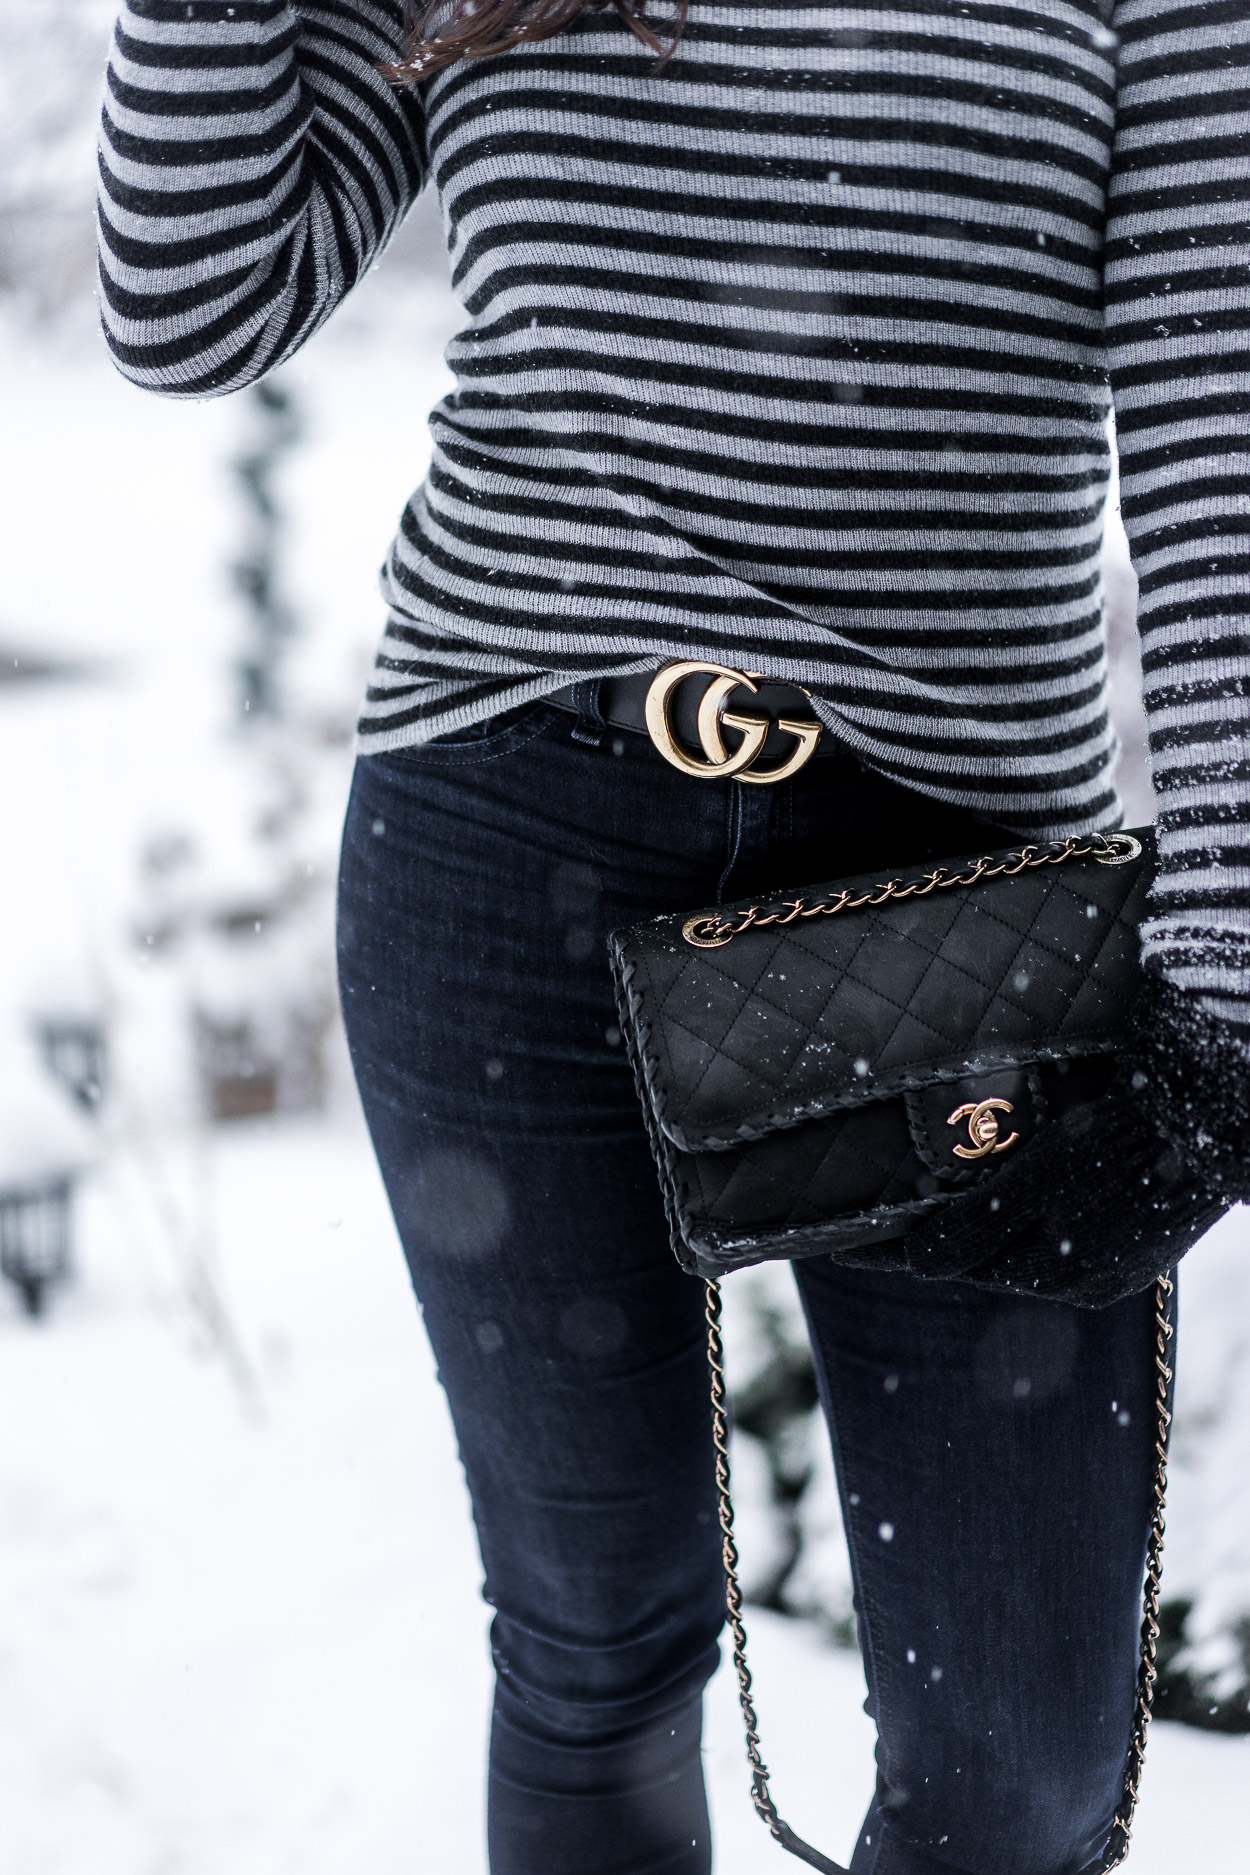 Vince Sweater, suede Chanel bag and Gucci Marmont belt